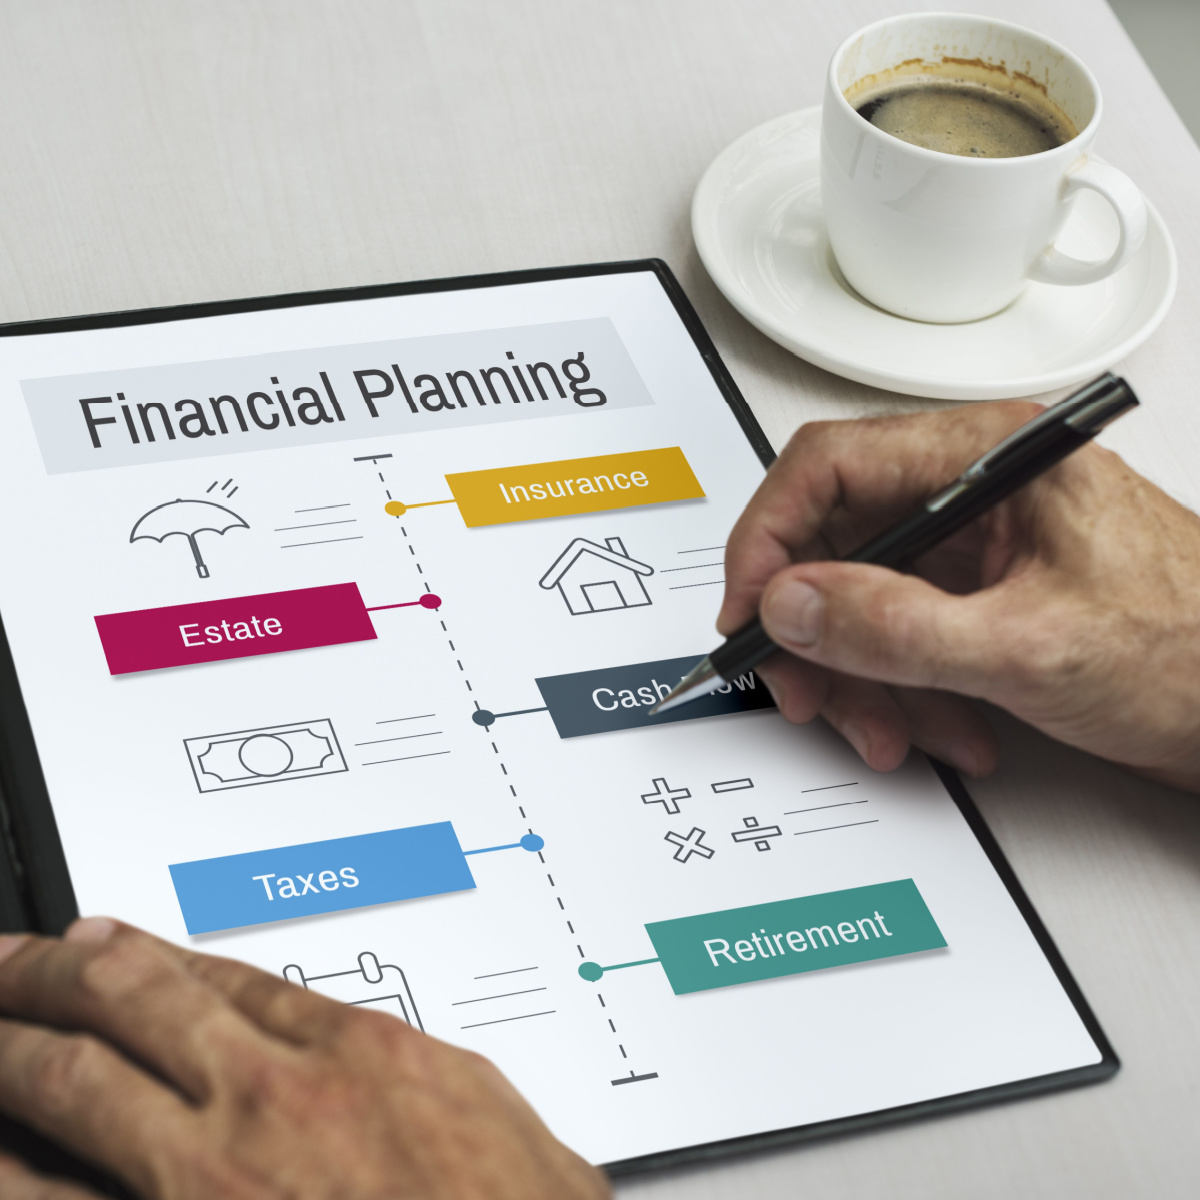 Financial planner discusses the different elements of financial planning